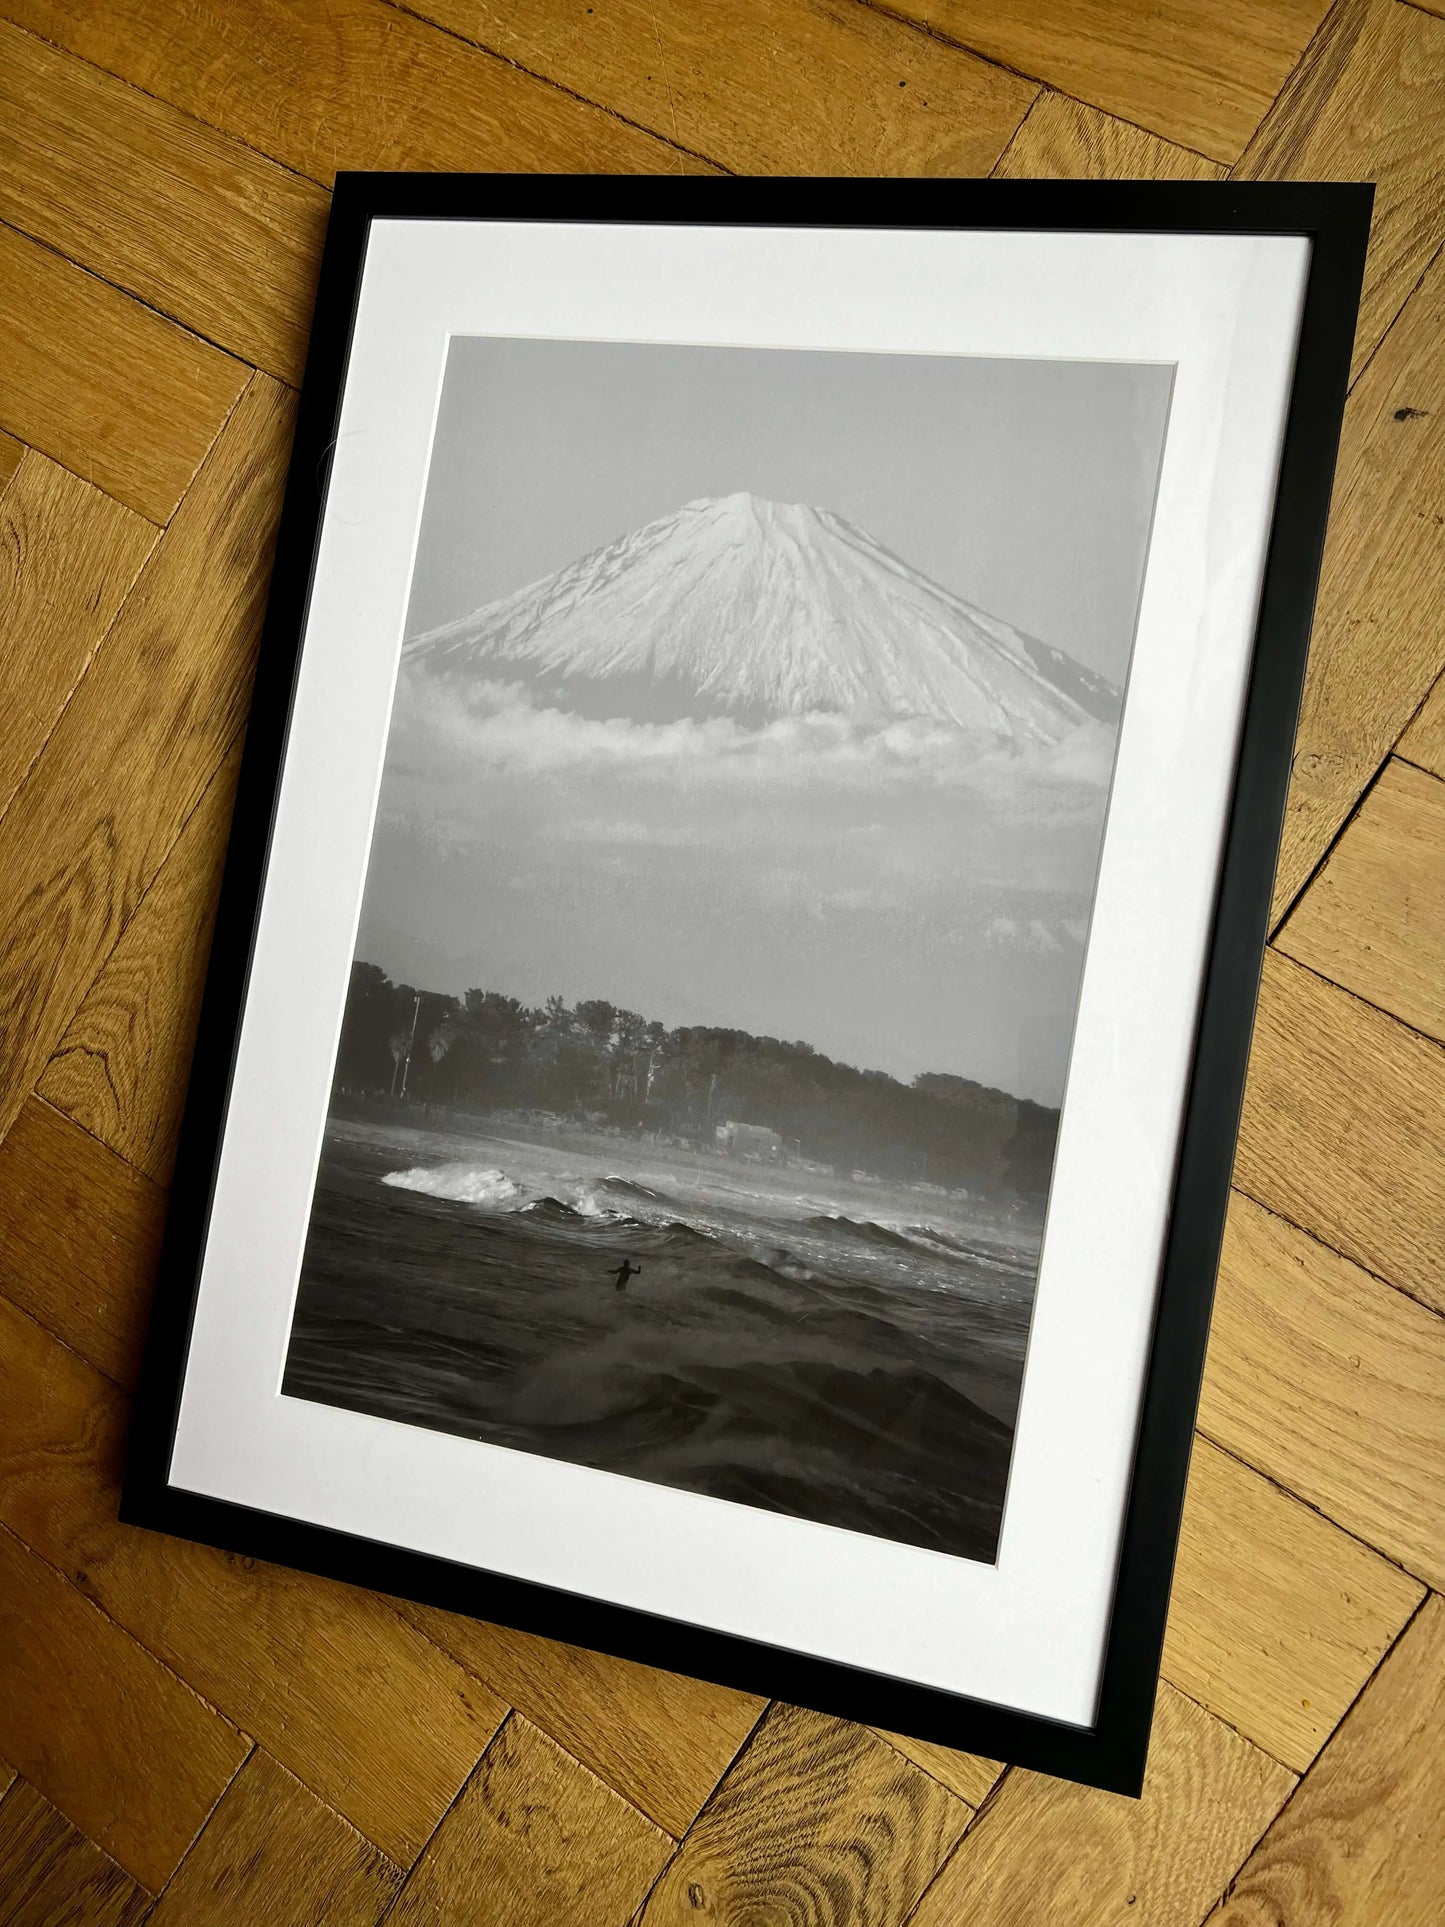 SOLD OUT - Mt. Fuji Surf Club (Limited Edition)